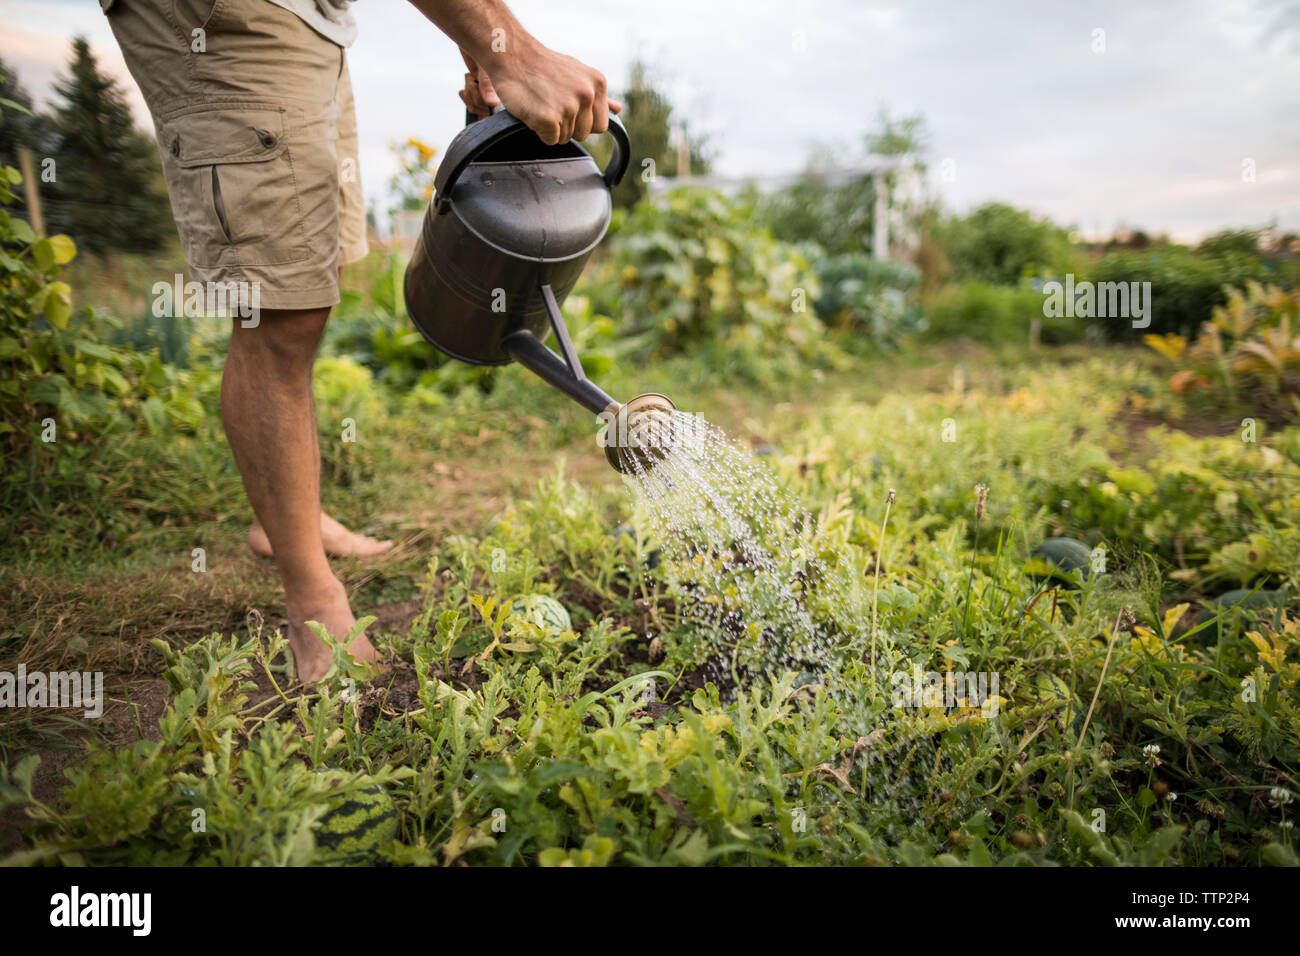 Low section of man watering plants at community garden Stock Photo